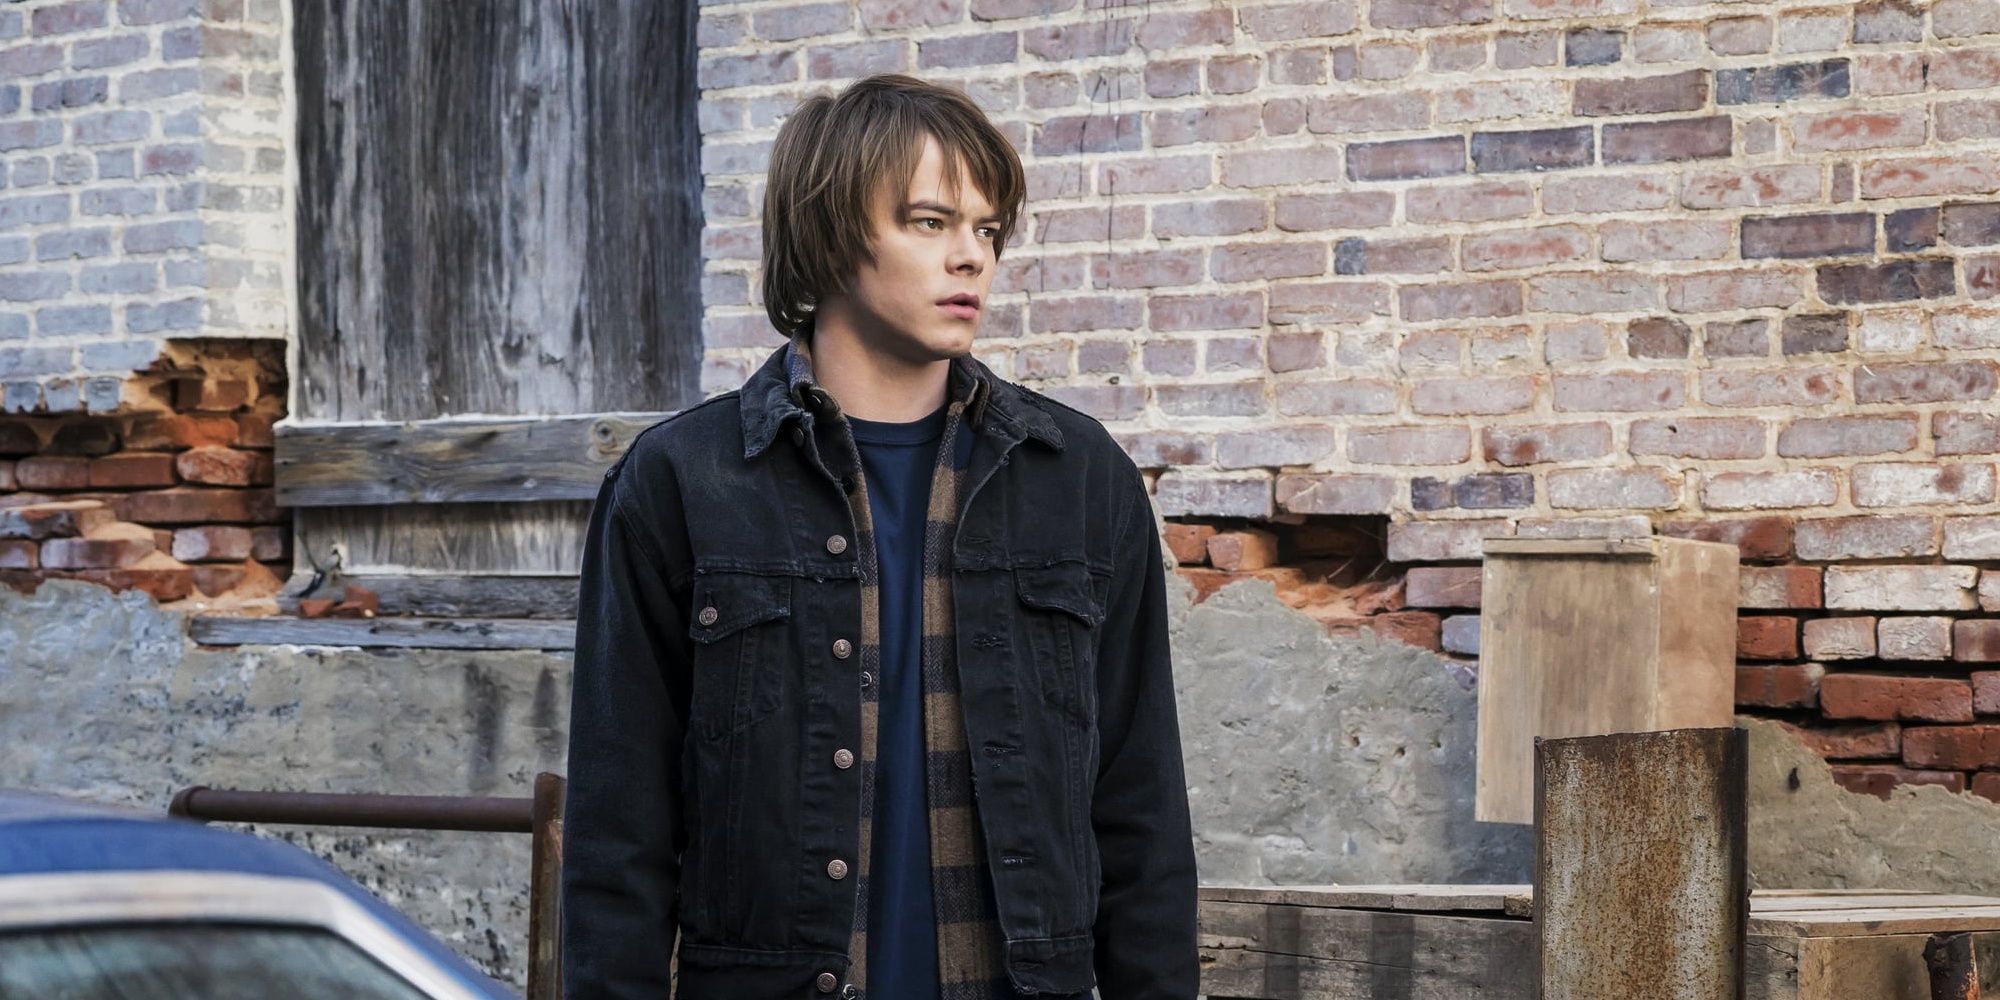 Jonathan Byers standing in alley in Stranger Things